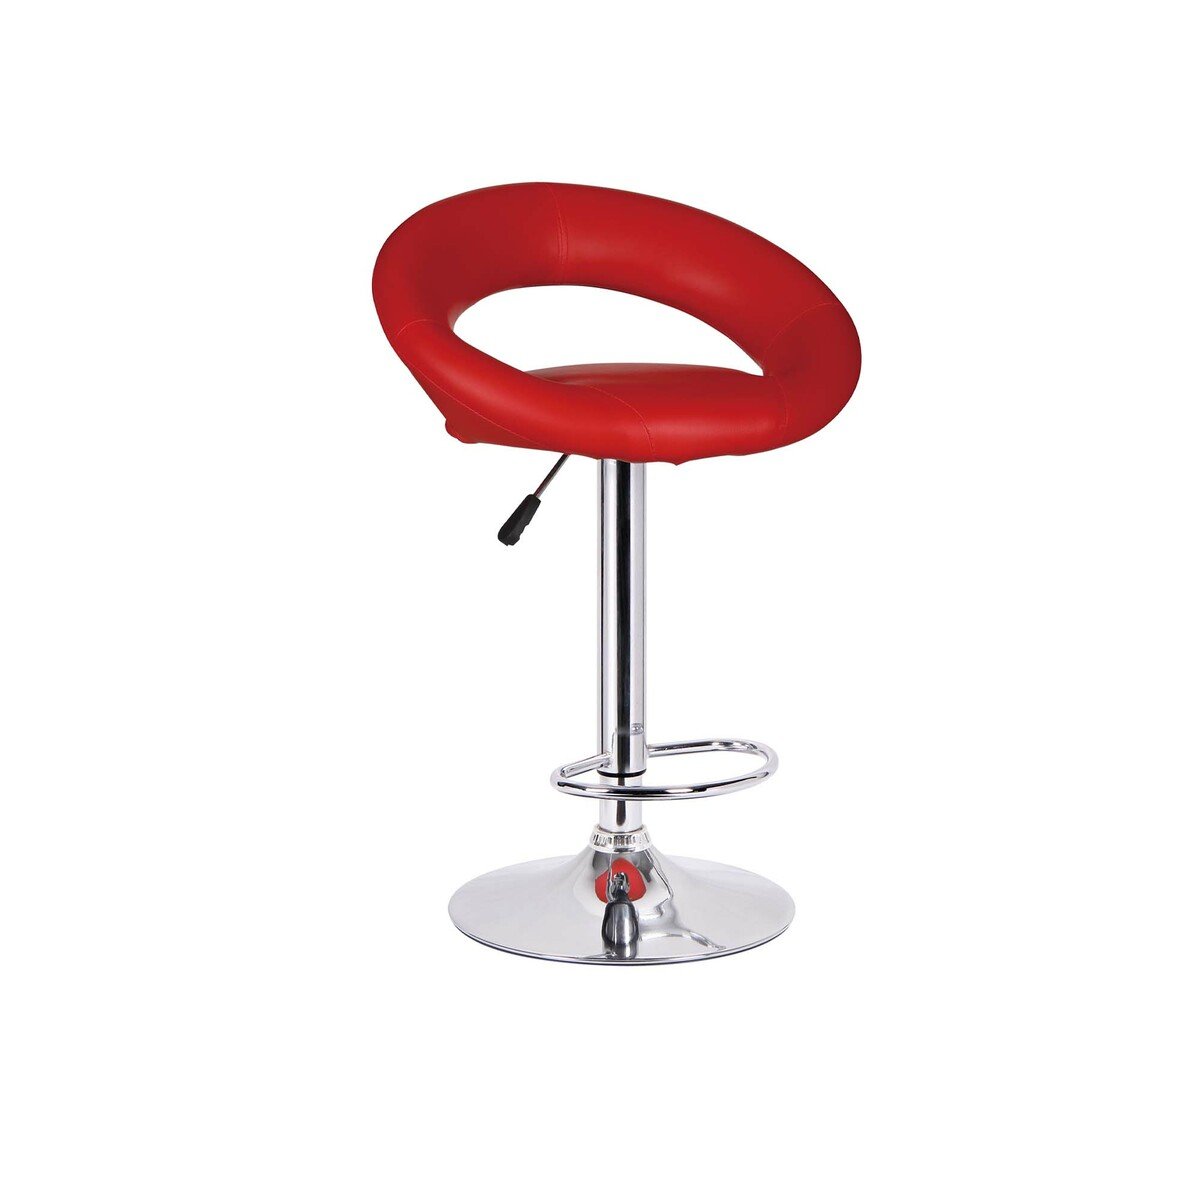 Maple Leaf Long Chair ZS-603 Red